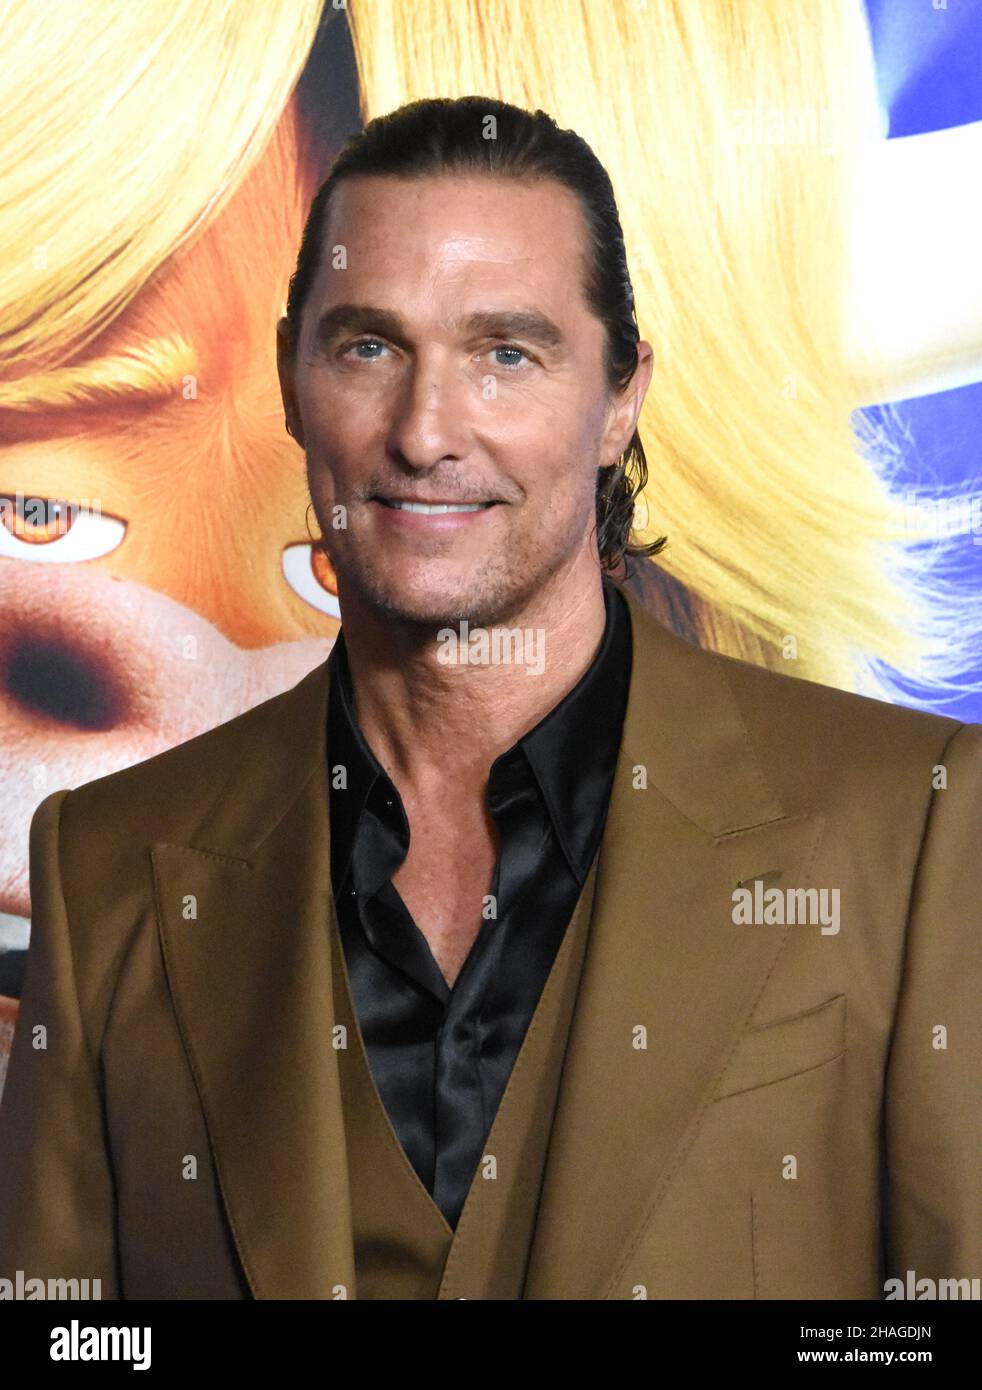 Los Angeles, California, USA 12th December 2021 Actor Matthew McConaughey attends Illumination's 'Sing 2' Premiere at The Greek Theatre on December 12, 2021 in Los Angeles, California, USA. Photo by Barry King/Alamy Live News Stock Photo